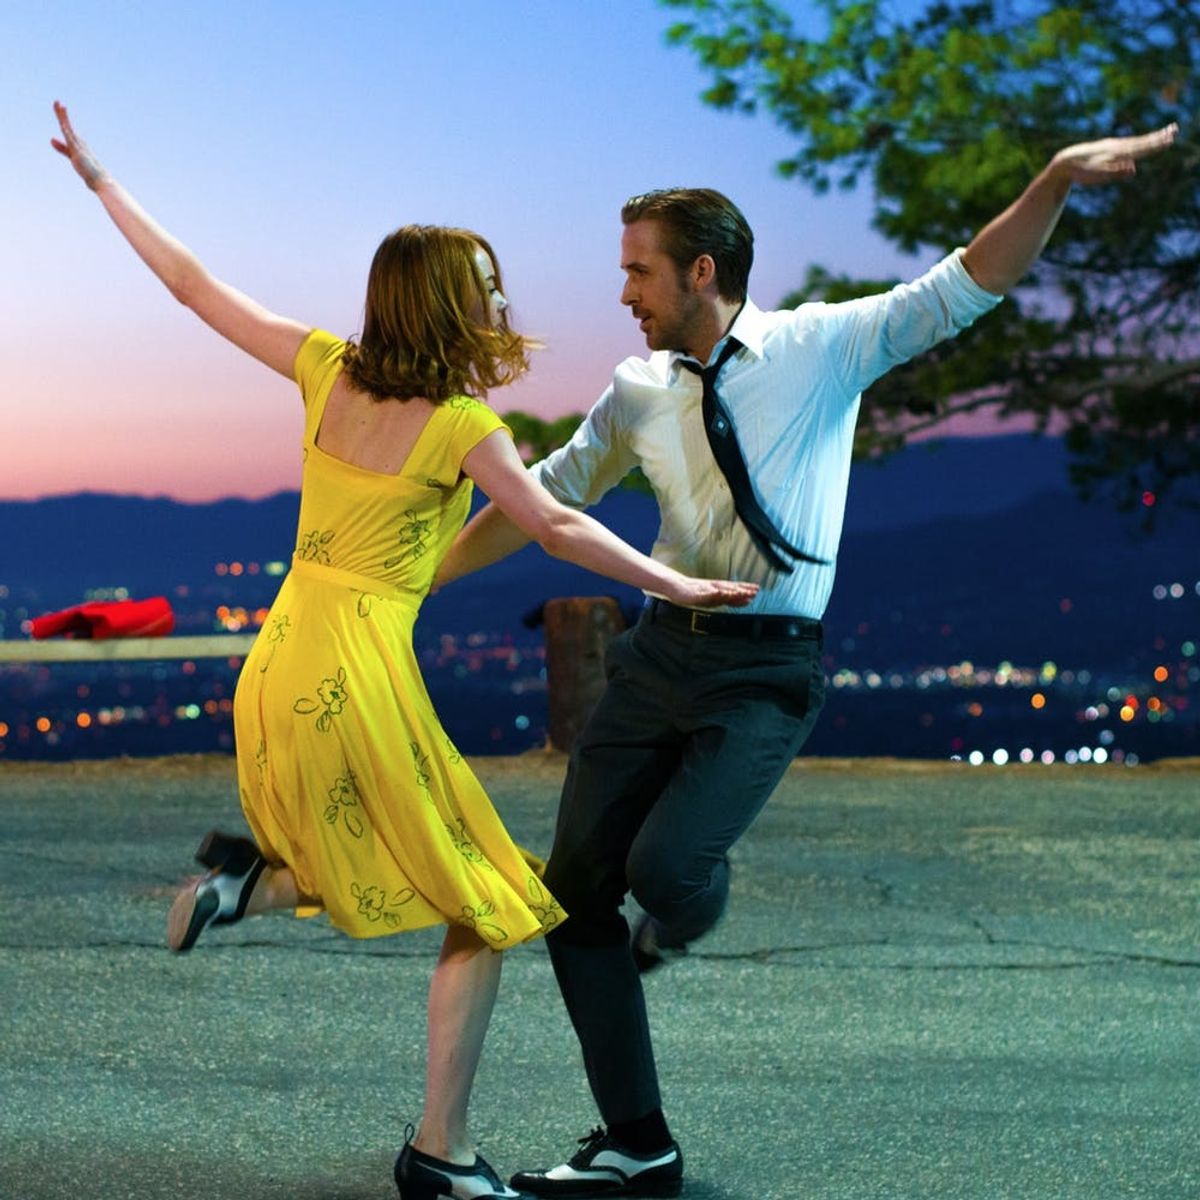 There’s Going to Be a ‘La La Land’-Inspired Reality Dating Show